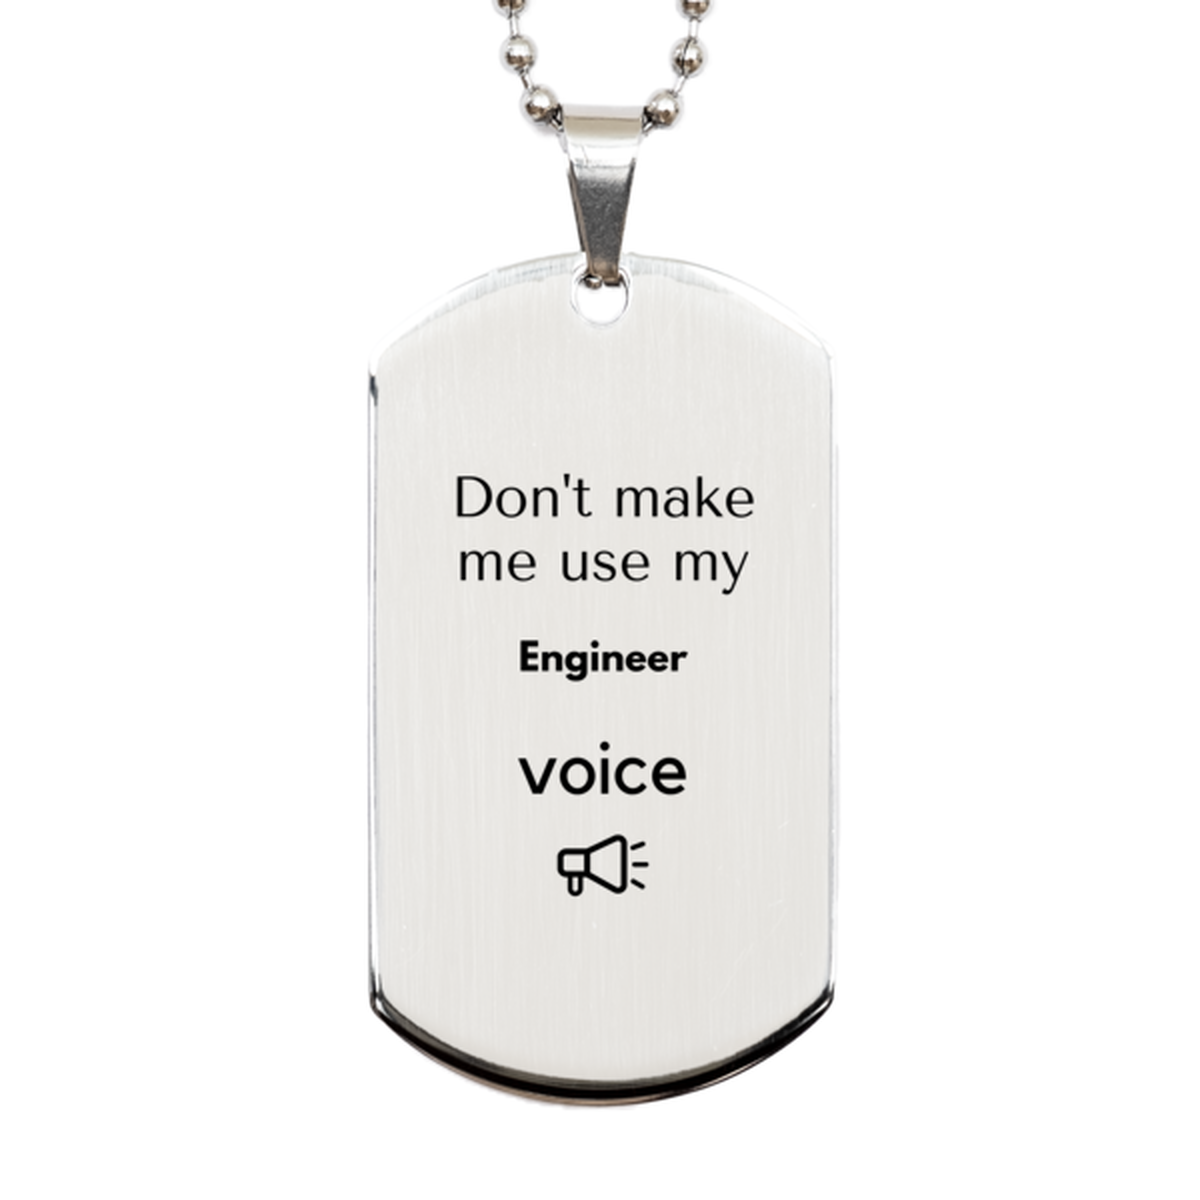 Don't make me use my Engineer voice, Sarcasm Engineer Gifts, Christmas Engineer Silver Dog Tag Birthday Unique Gifts For Engineer Coworkers, Men, Women, Colleague, Friends